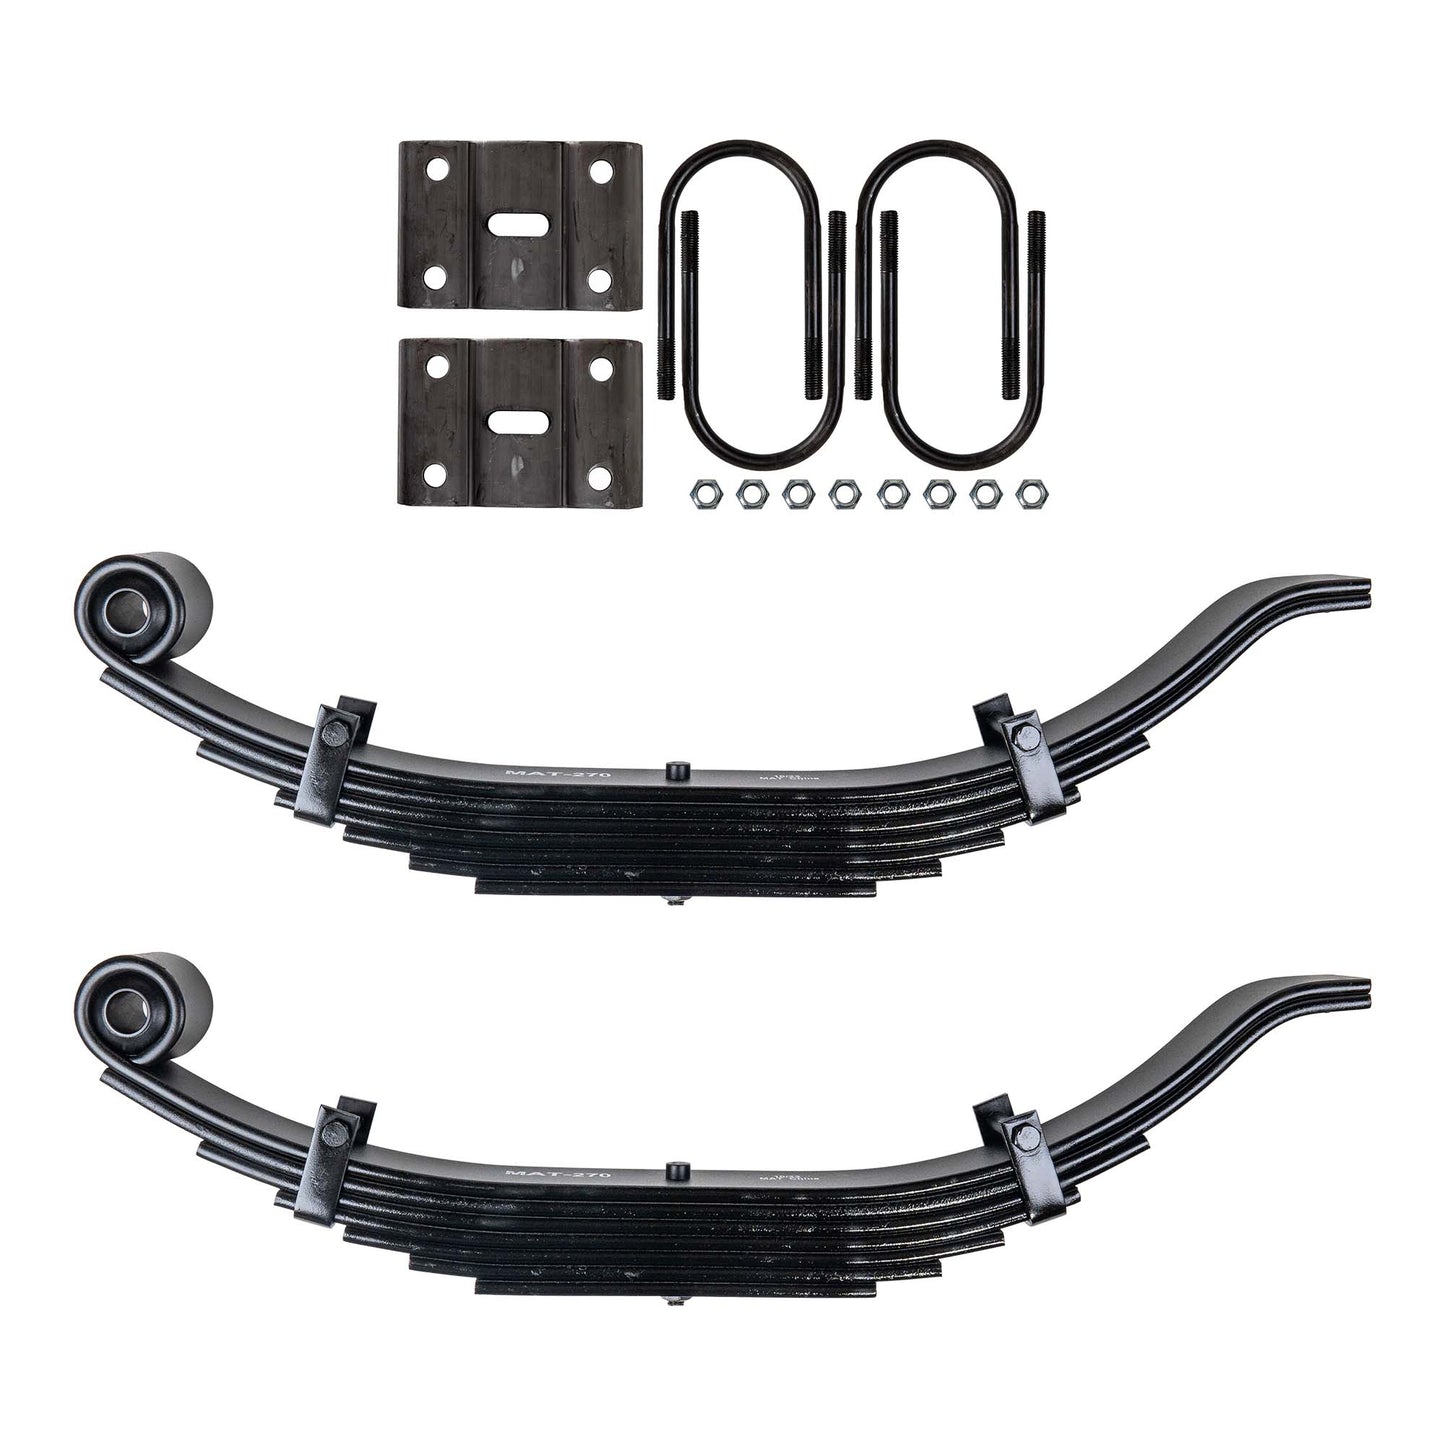 Pair - 7 Leaf 30" x 3" Wide Trailer Heavy Duty Slipper Spring for 15,000 - 16,000 lb Axles with Ubolts